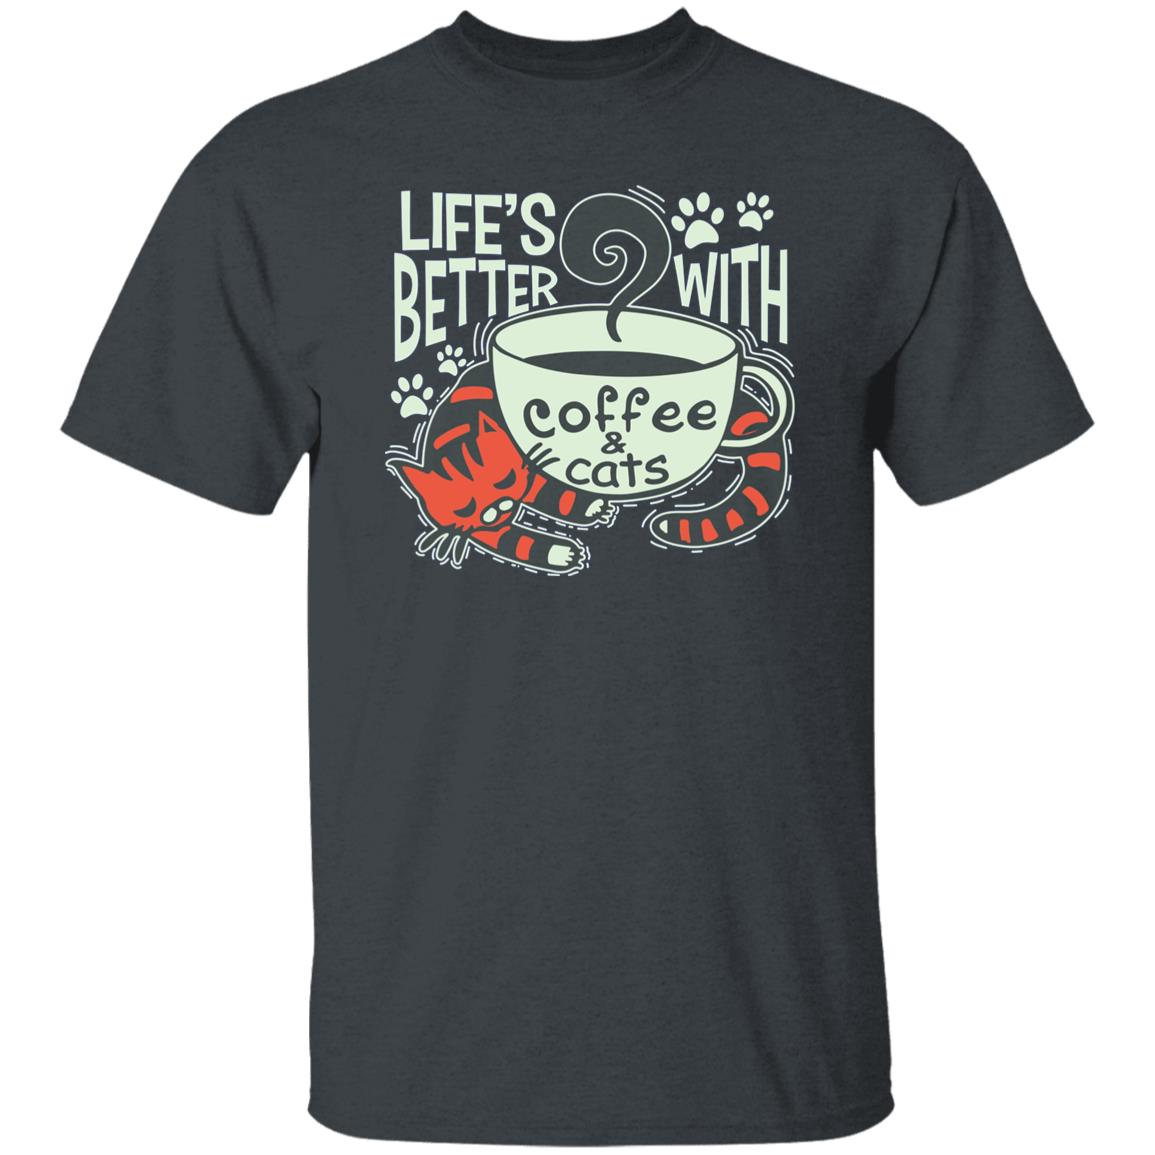 Life is better with coffee and cats Unisex shirt Black Dark Heather-Family-Gift-Planet